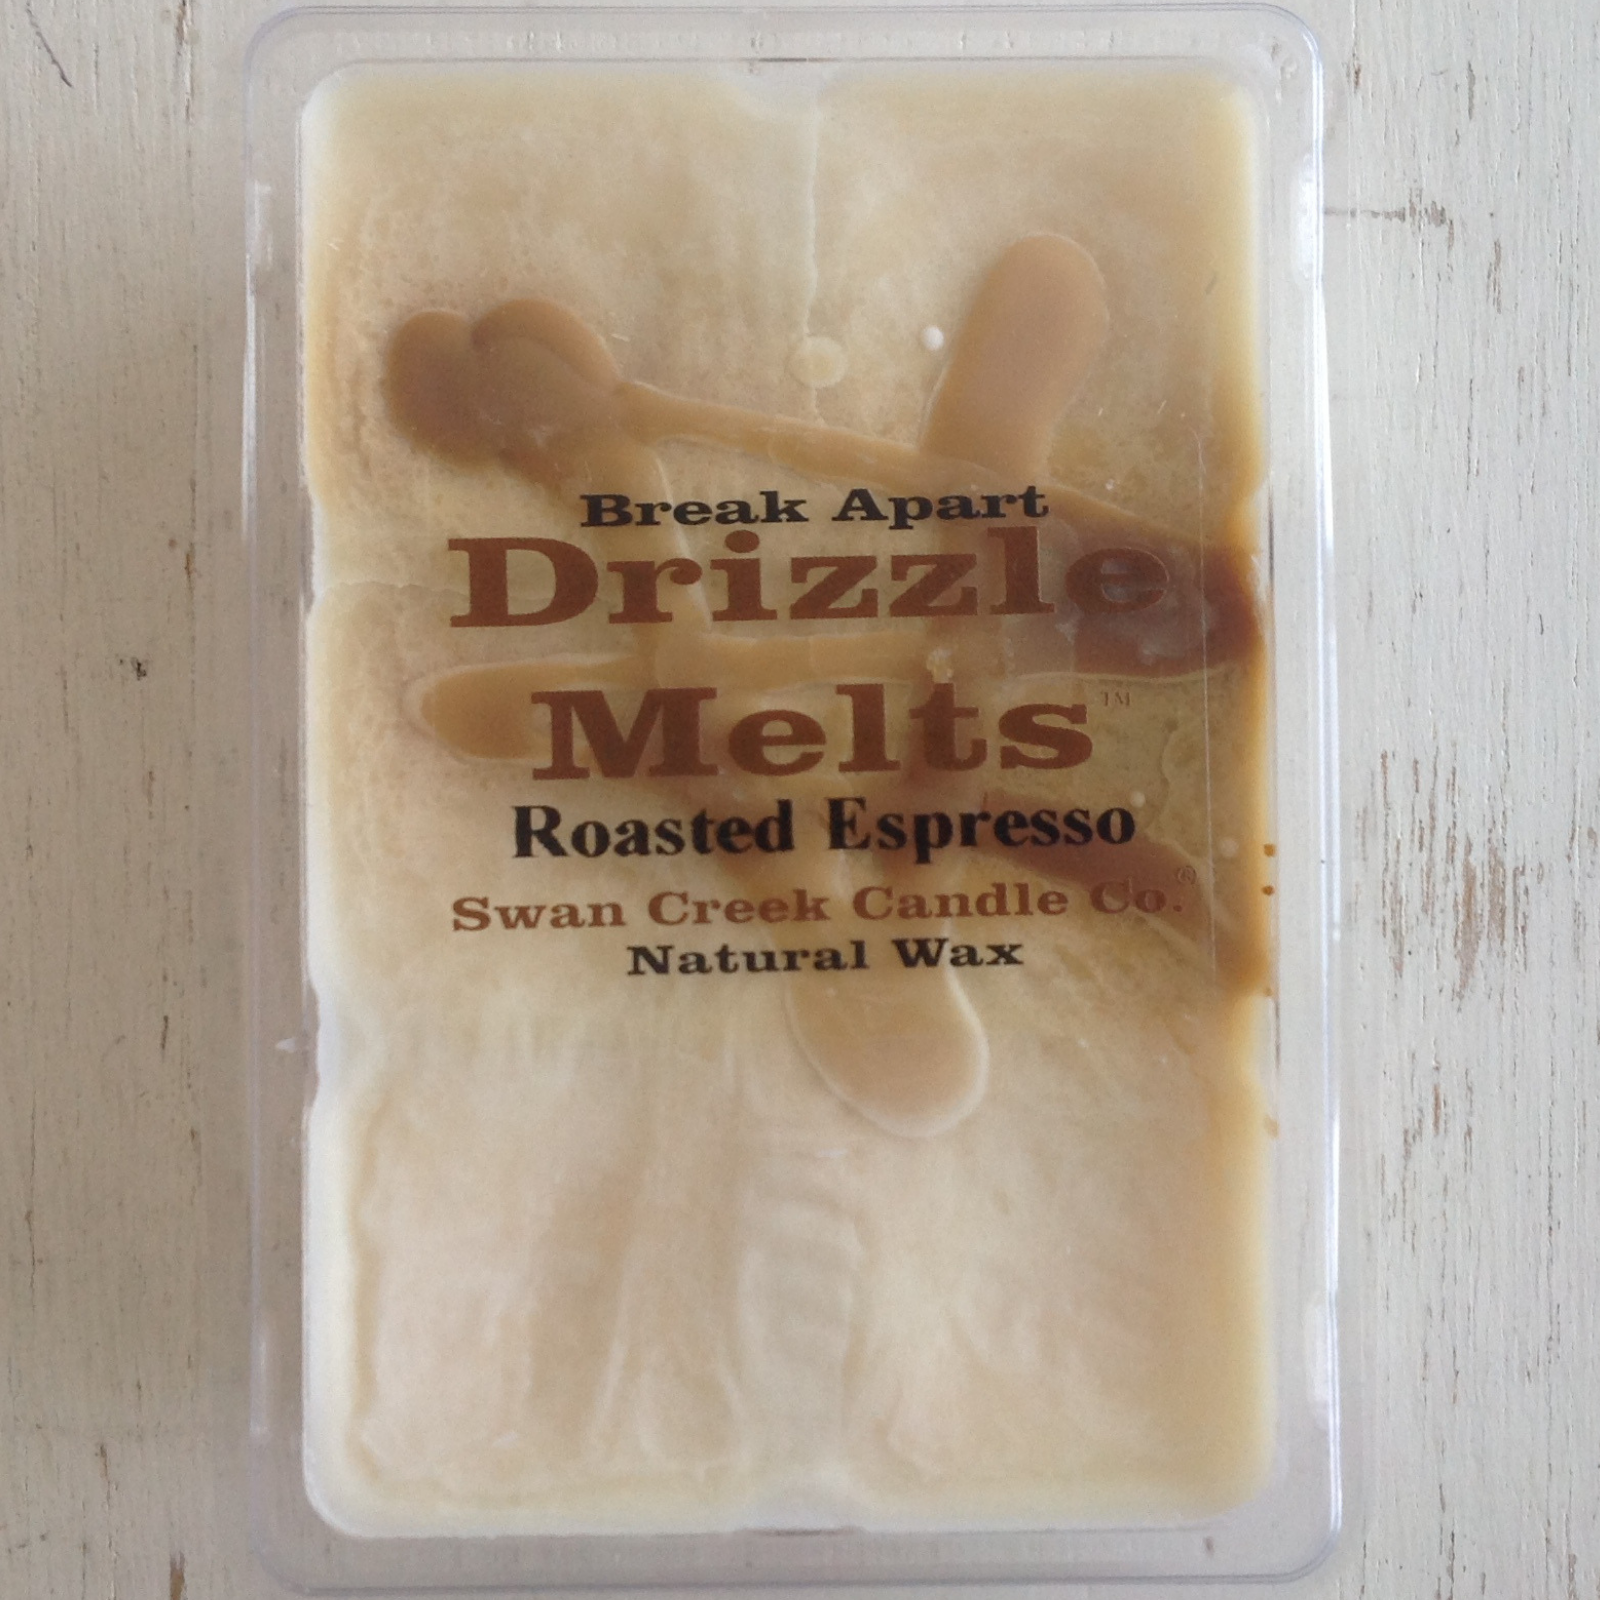 Swan Creek Candle Company Herbal Drizzle Wax Melts Roasted Espresso